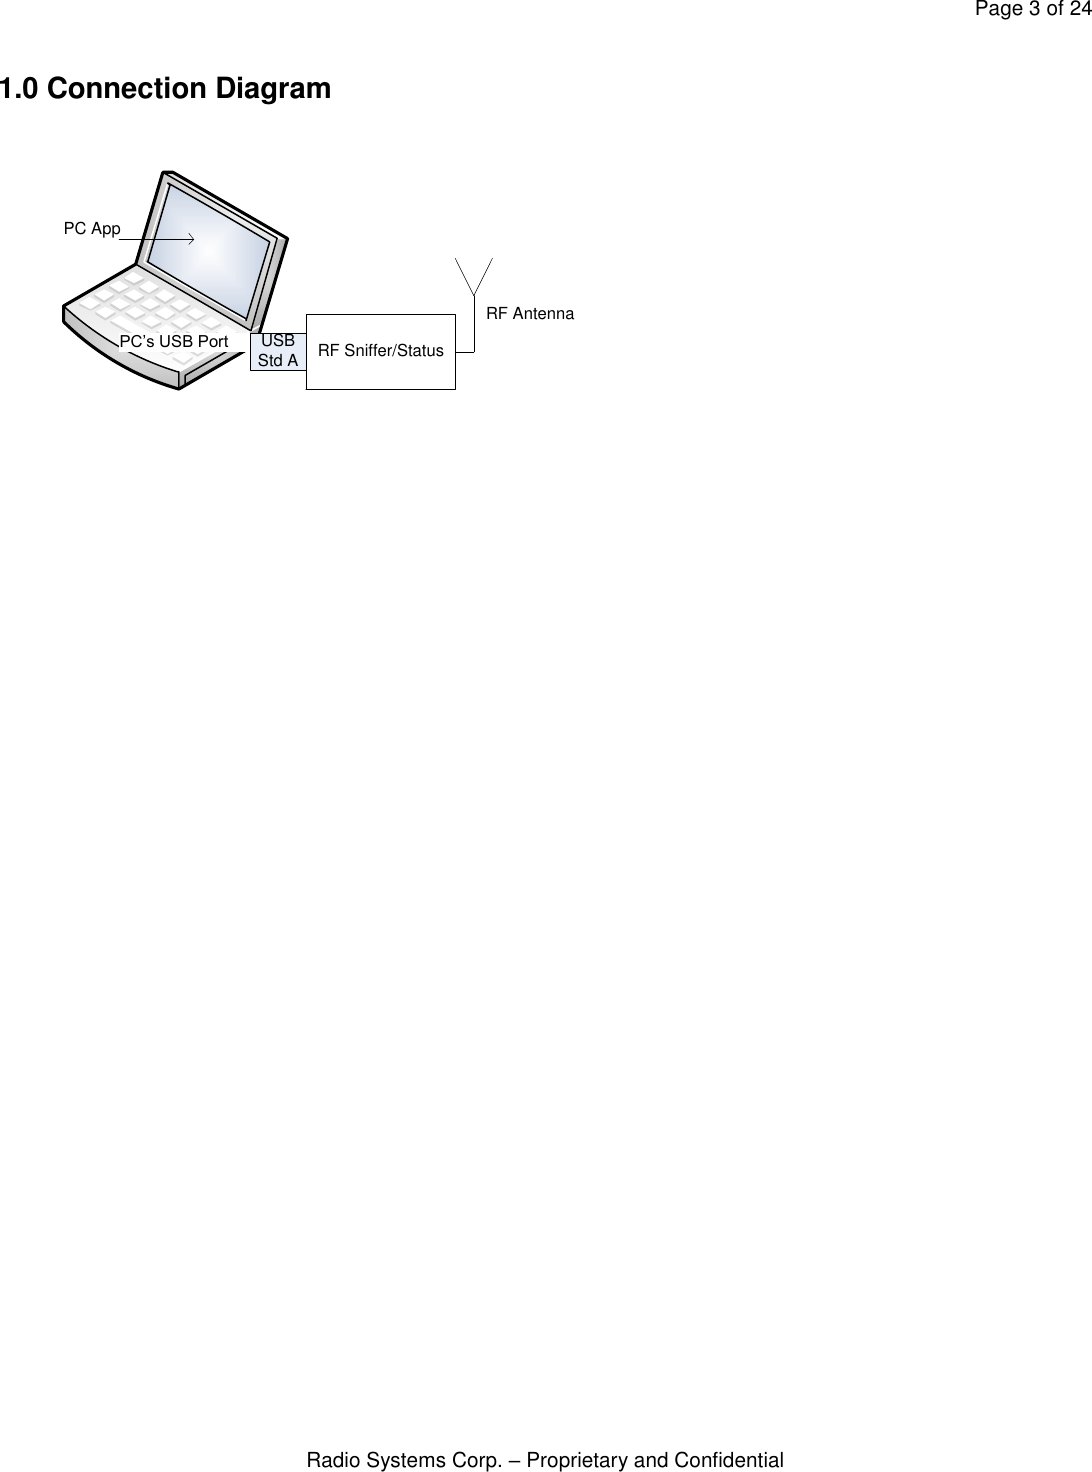 Page 3 of 24 Radio Systems Corp. – Proprietary and Confidential  1.0 Connection Diagram   PC’s USB PortPC AppUSBStd A RF Sniffer/StatusRF Antenna 